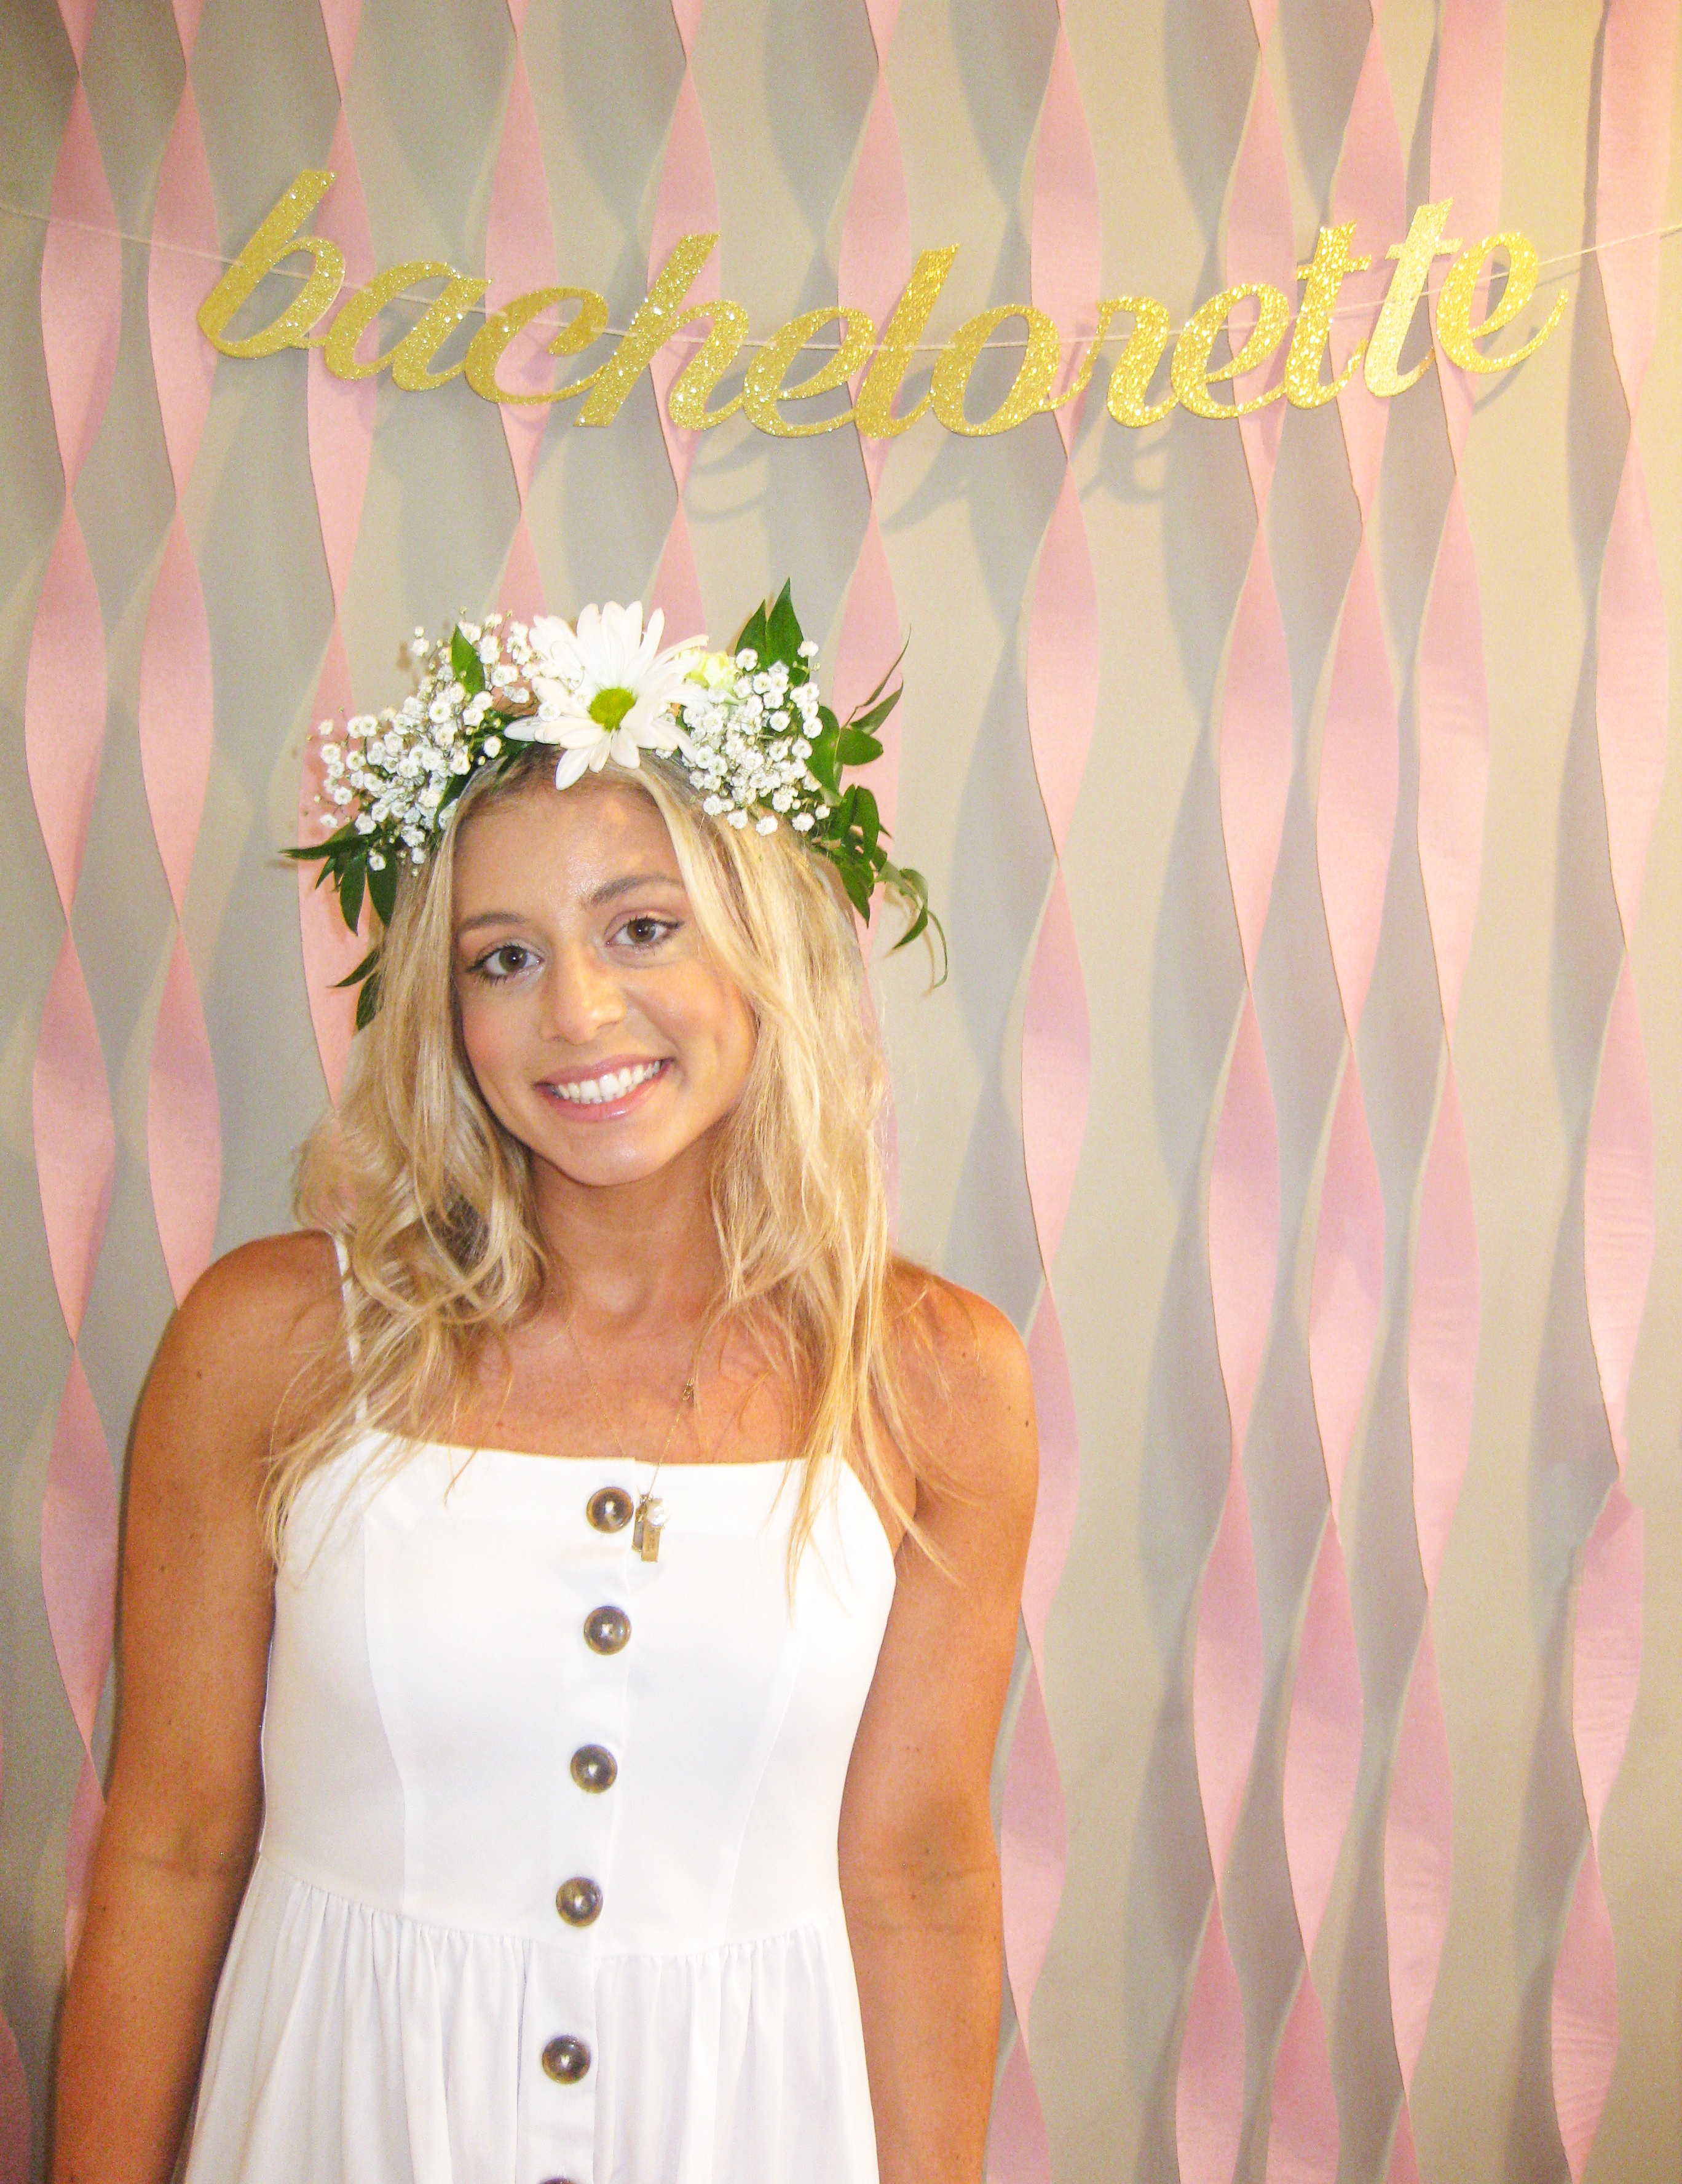 Molly B You saved to Fetes de Fleurs Charleston // DIY Floral Parties #CHARLESTONBACHELORETTE FUN! Create your own DIY floral crown!